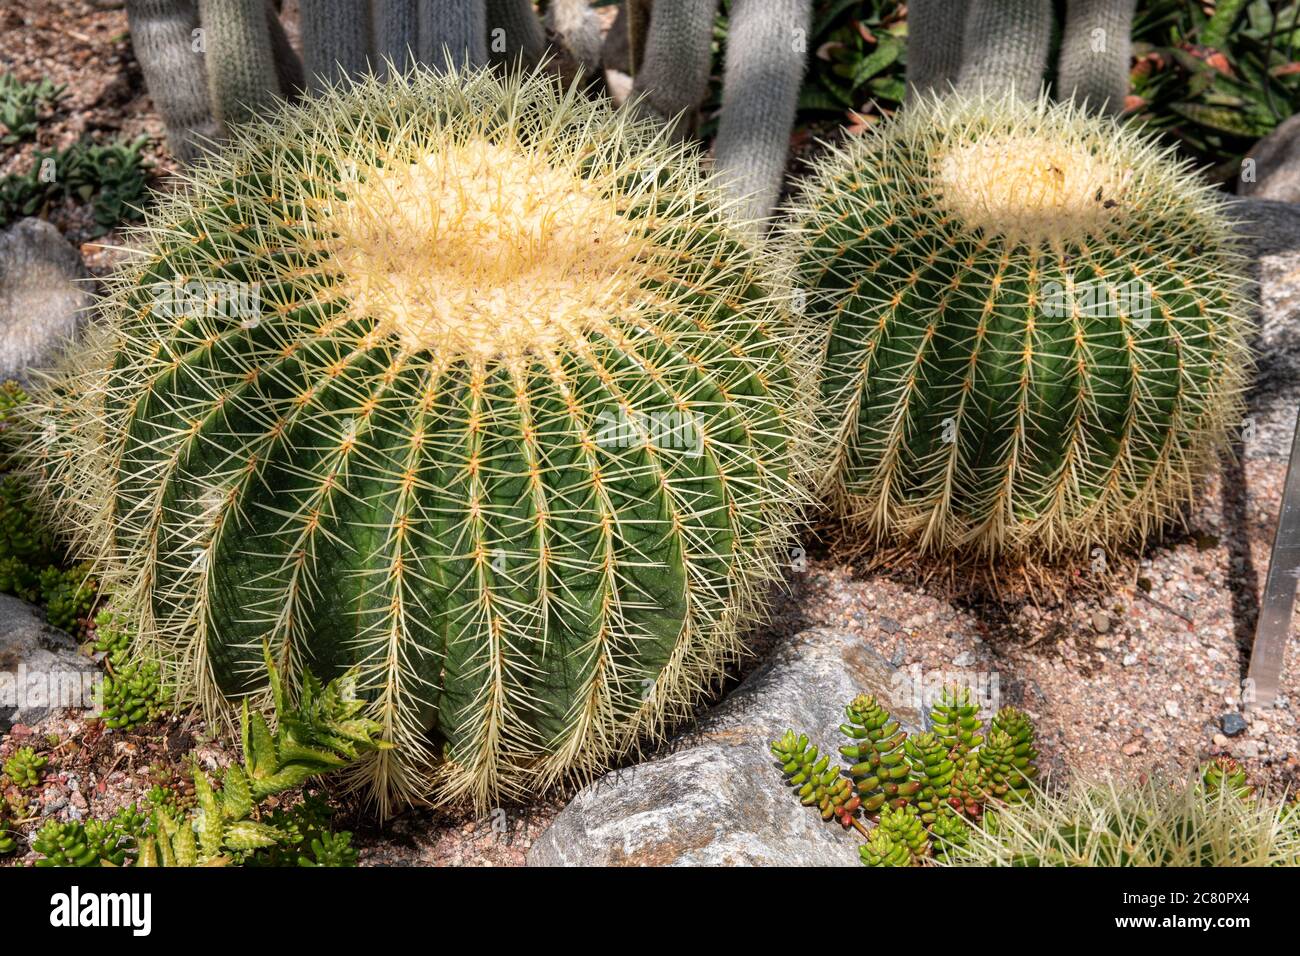 Echinocactus grusonii, also known as the golden barrel cactus, golden ball or mother-in-law's cushion, cactuses at Winter Garden in Helsinki, Finland Stock Photo